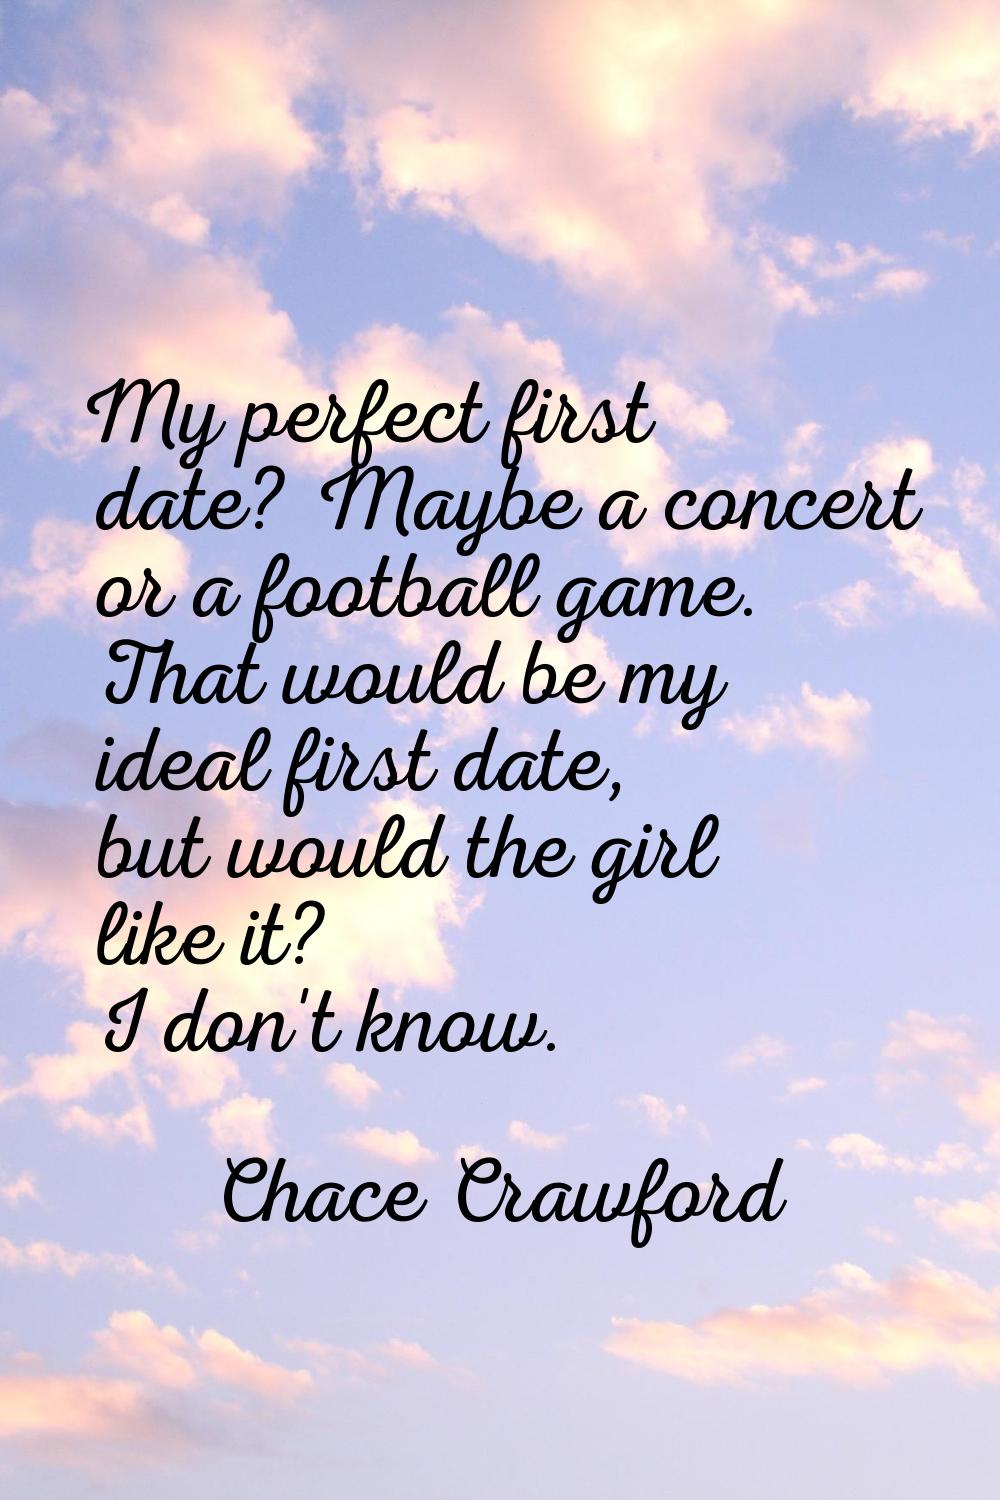 My perfect first date? Maybe a concert or a football game. That would be my ideal first date, but w